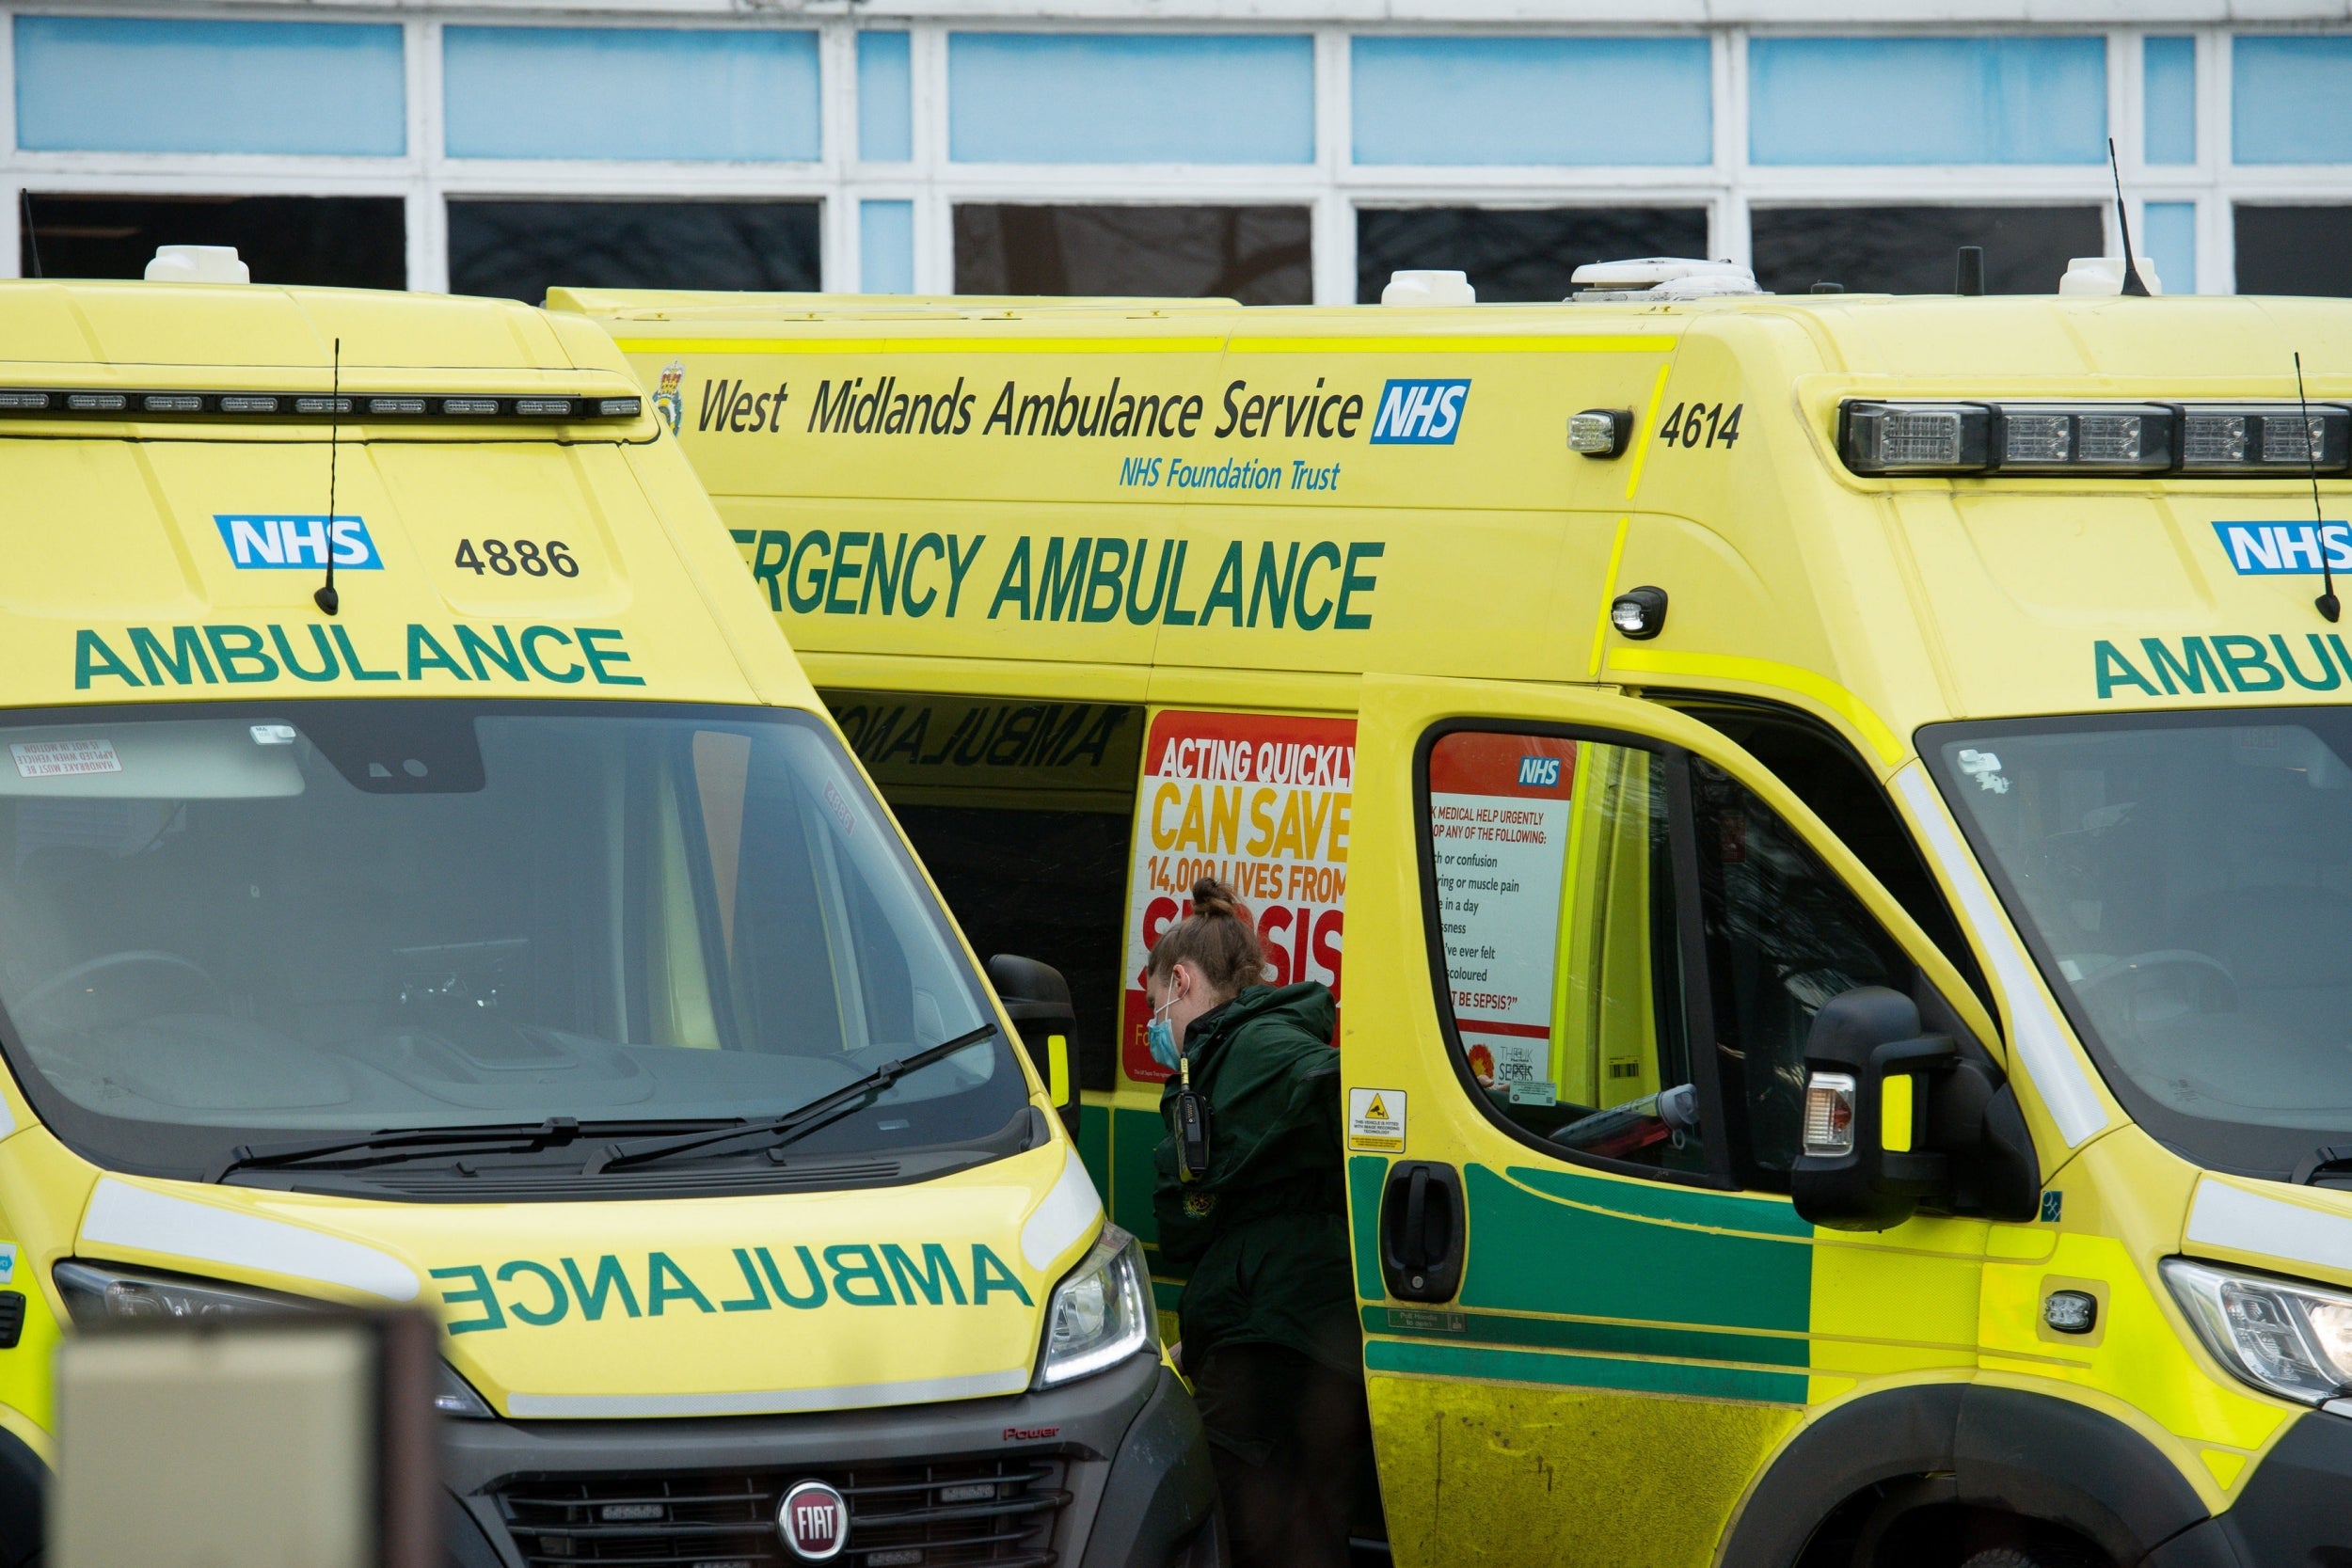 West Midlands Ambulance sent two ambulances and two paramedic officers to the scene